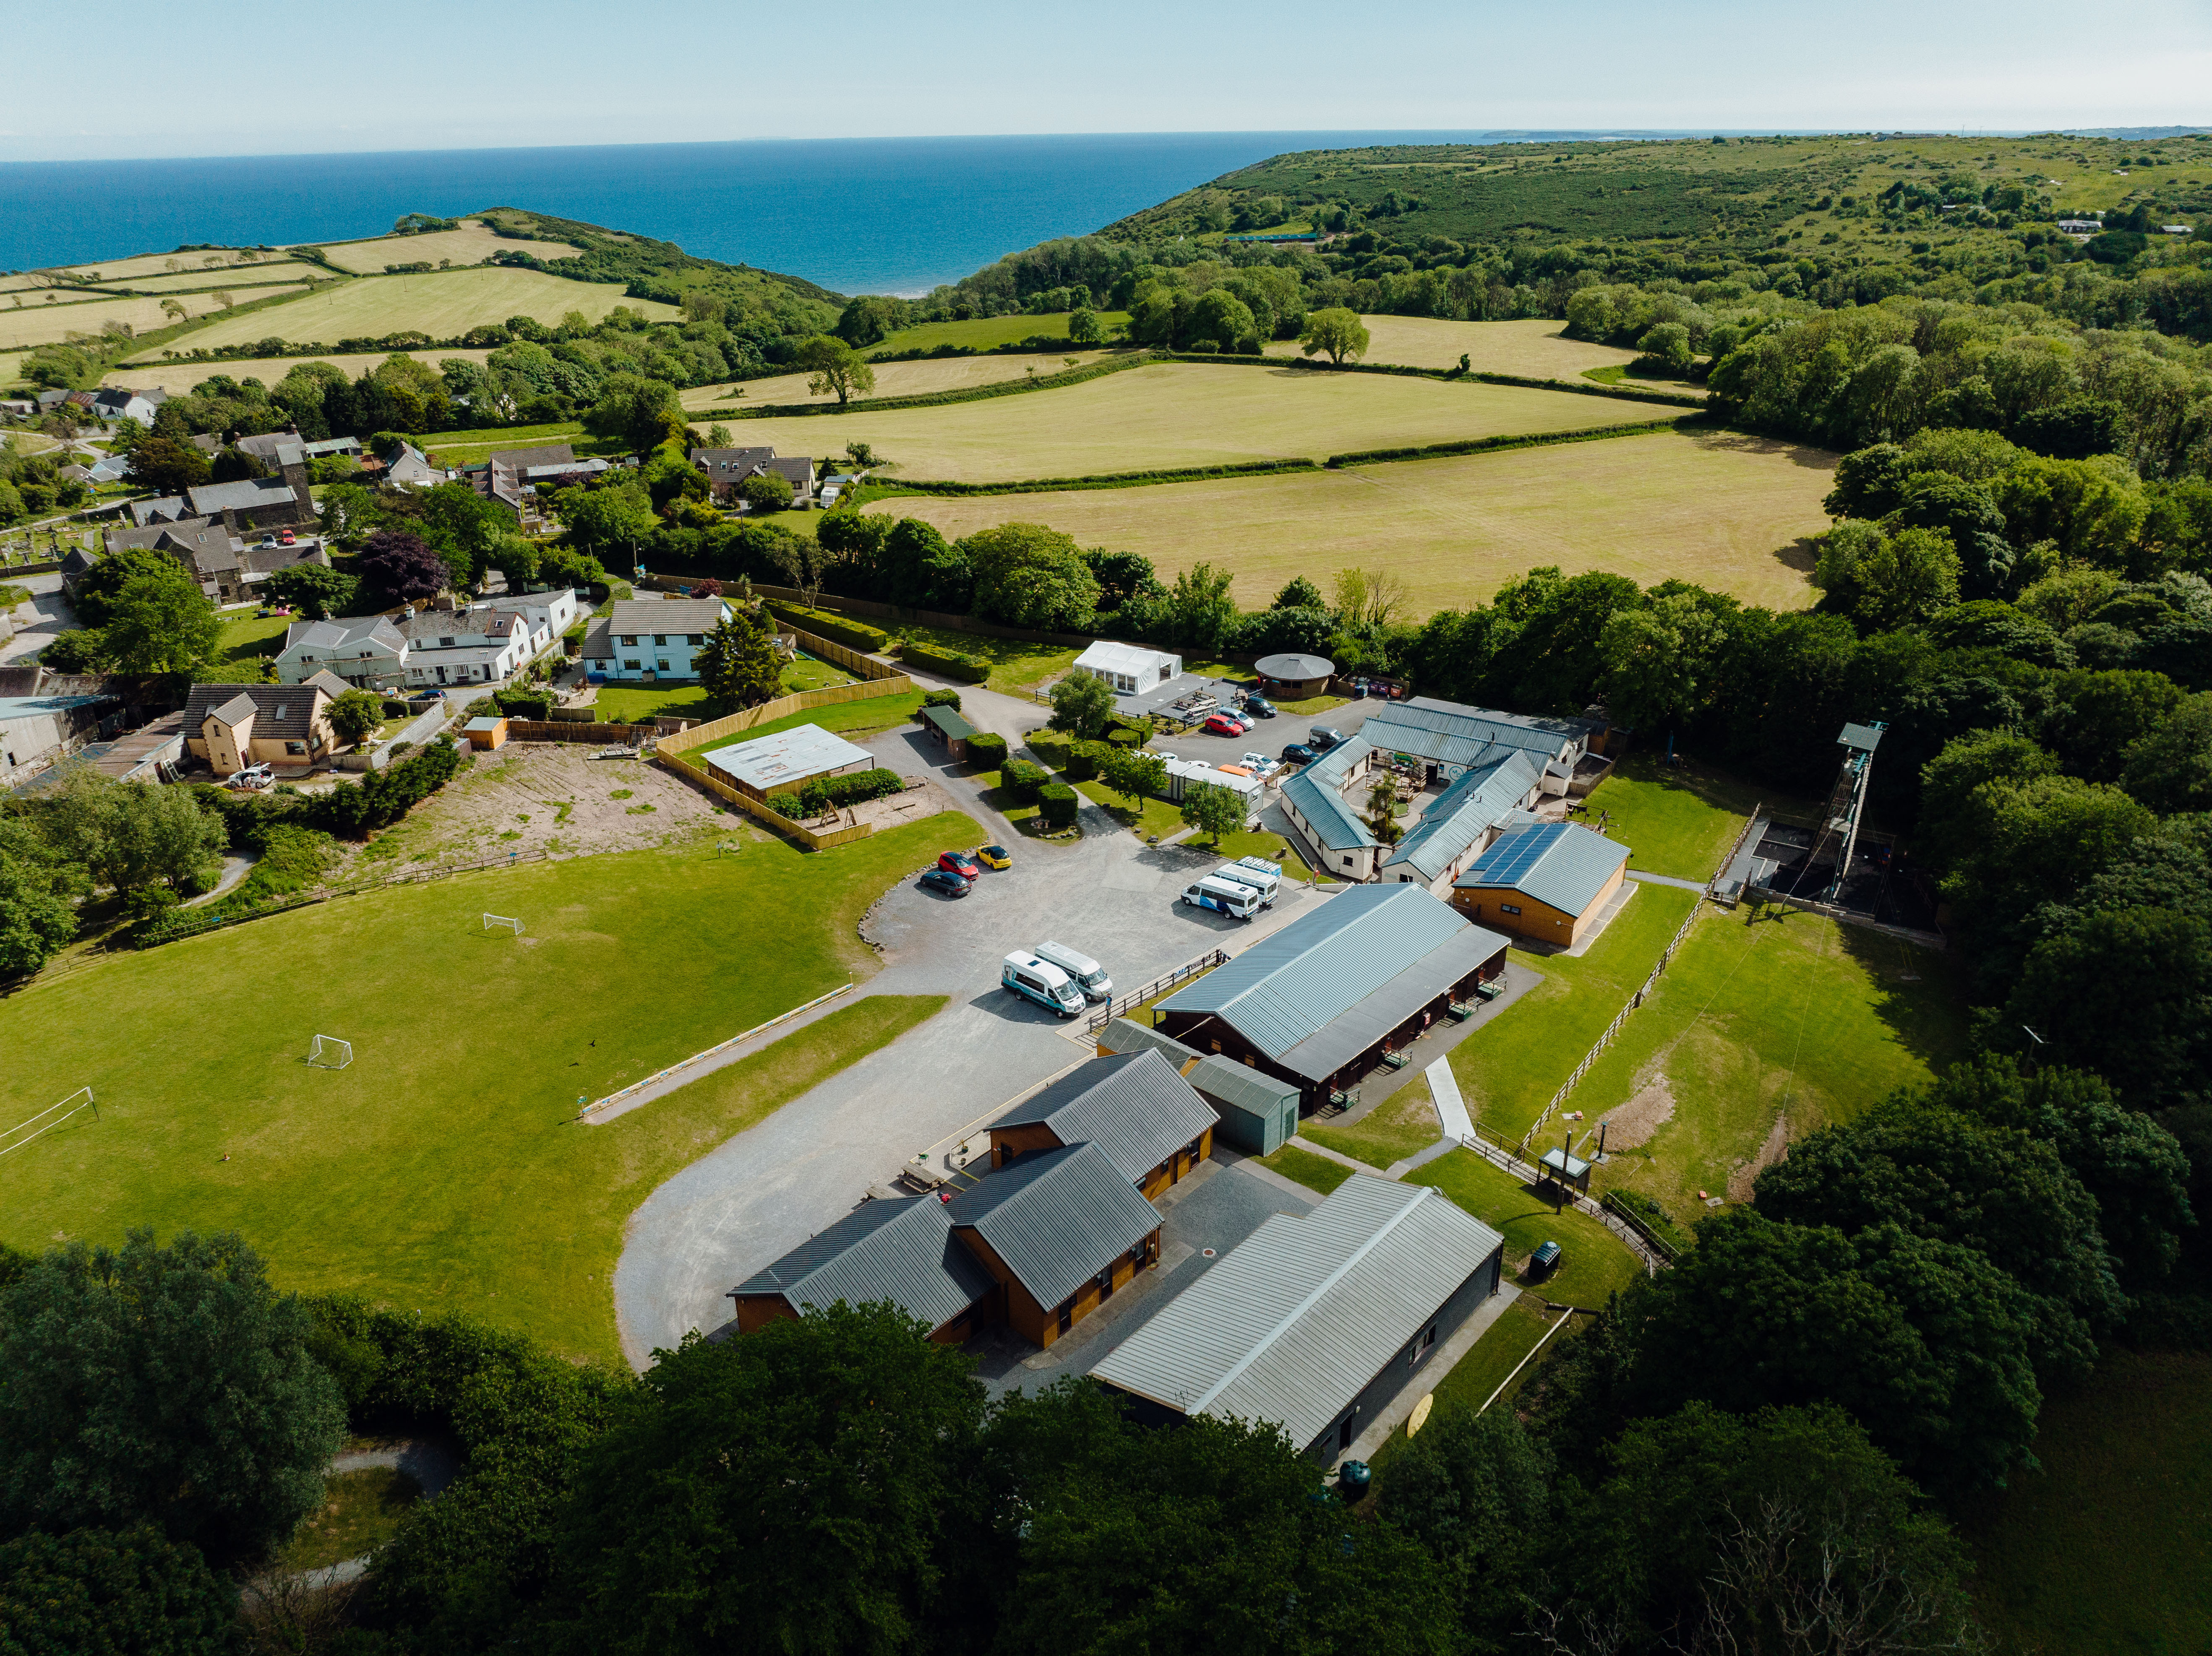 Morfa Bay Adventure - as seen from above